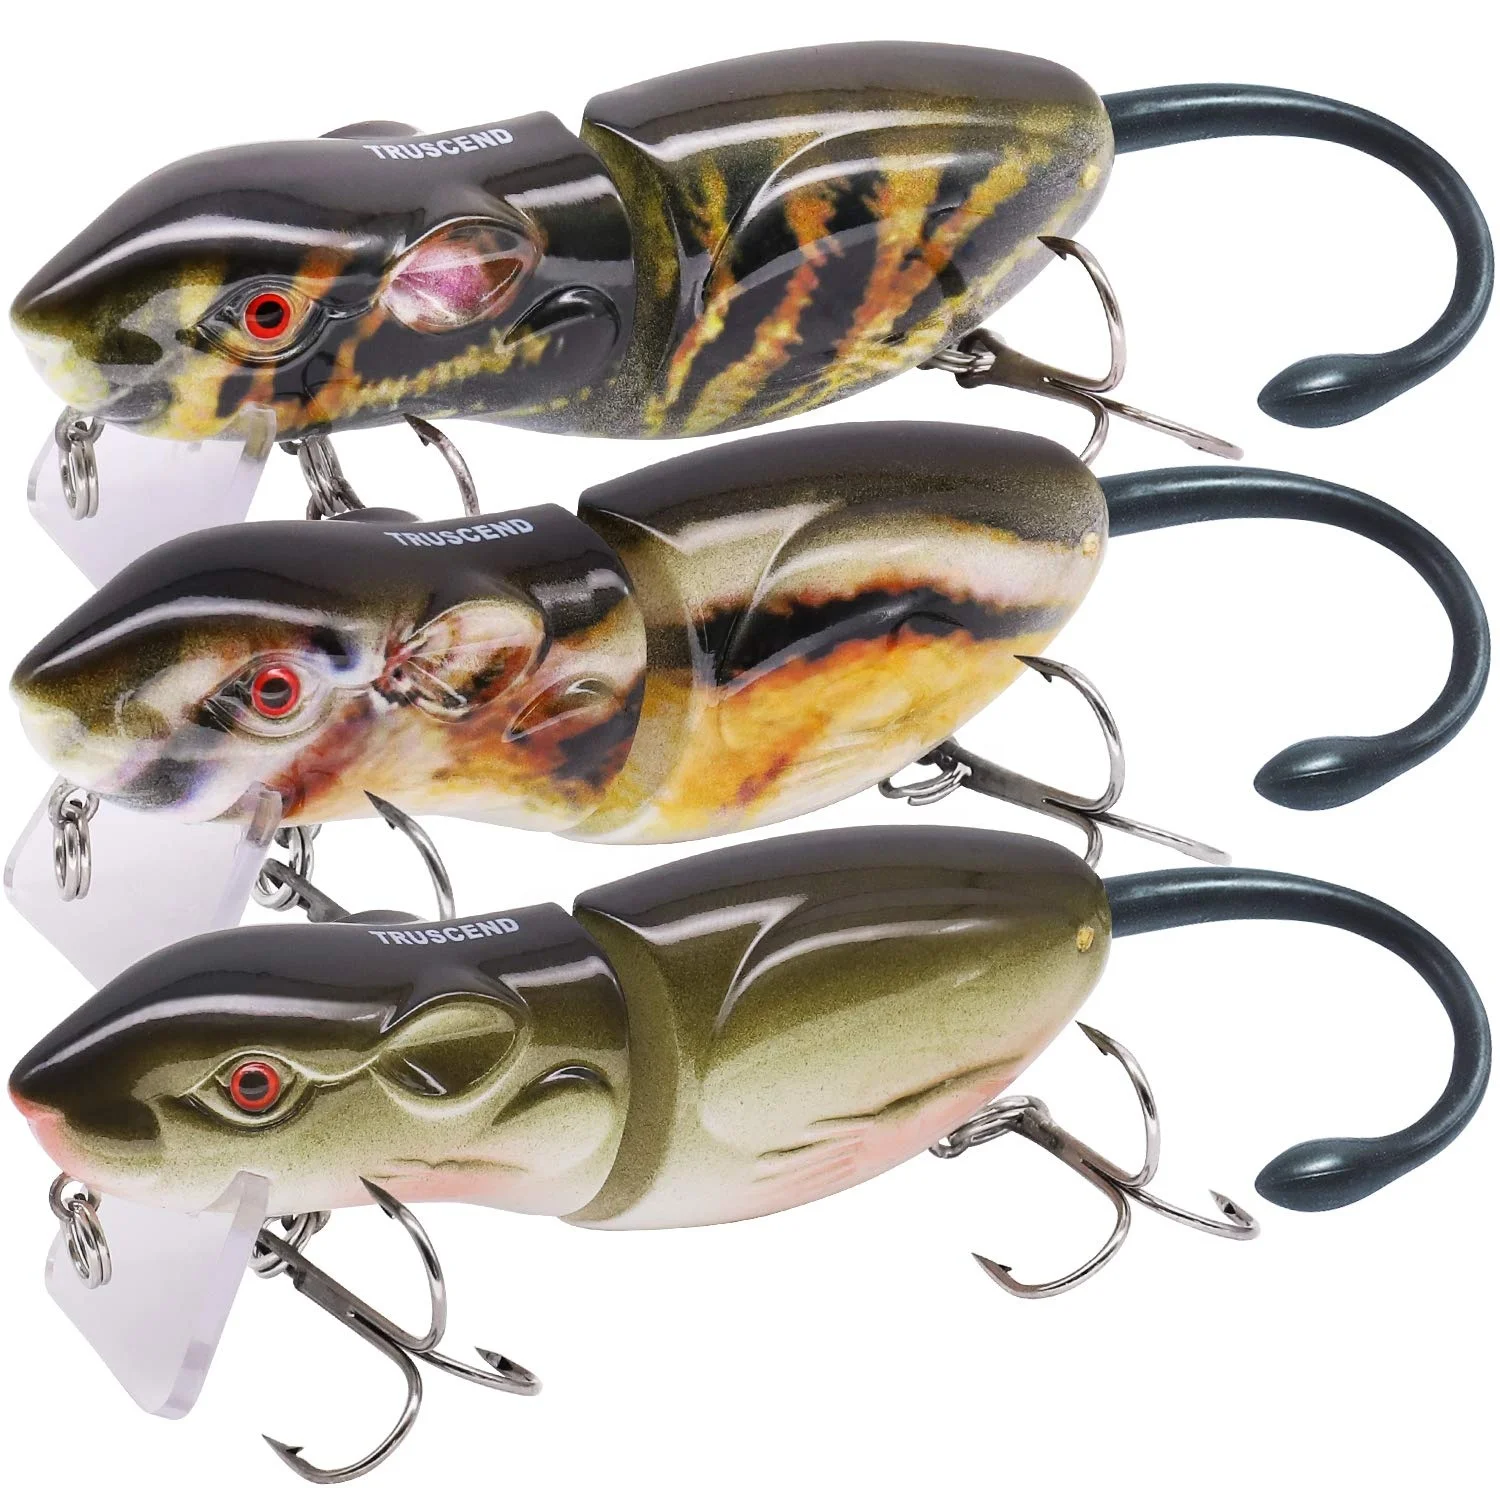 

TRUSCEND Amazon Best Seller Freshwater Fishing Lures Big Rat TopWater Baits For Bass Fishing Topwater Baits, G1-3.5-0.75oz